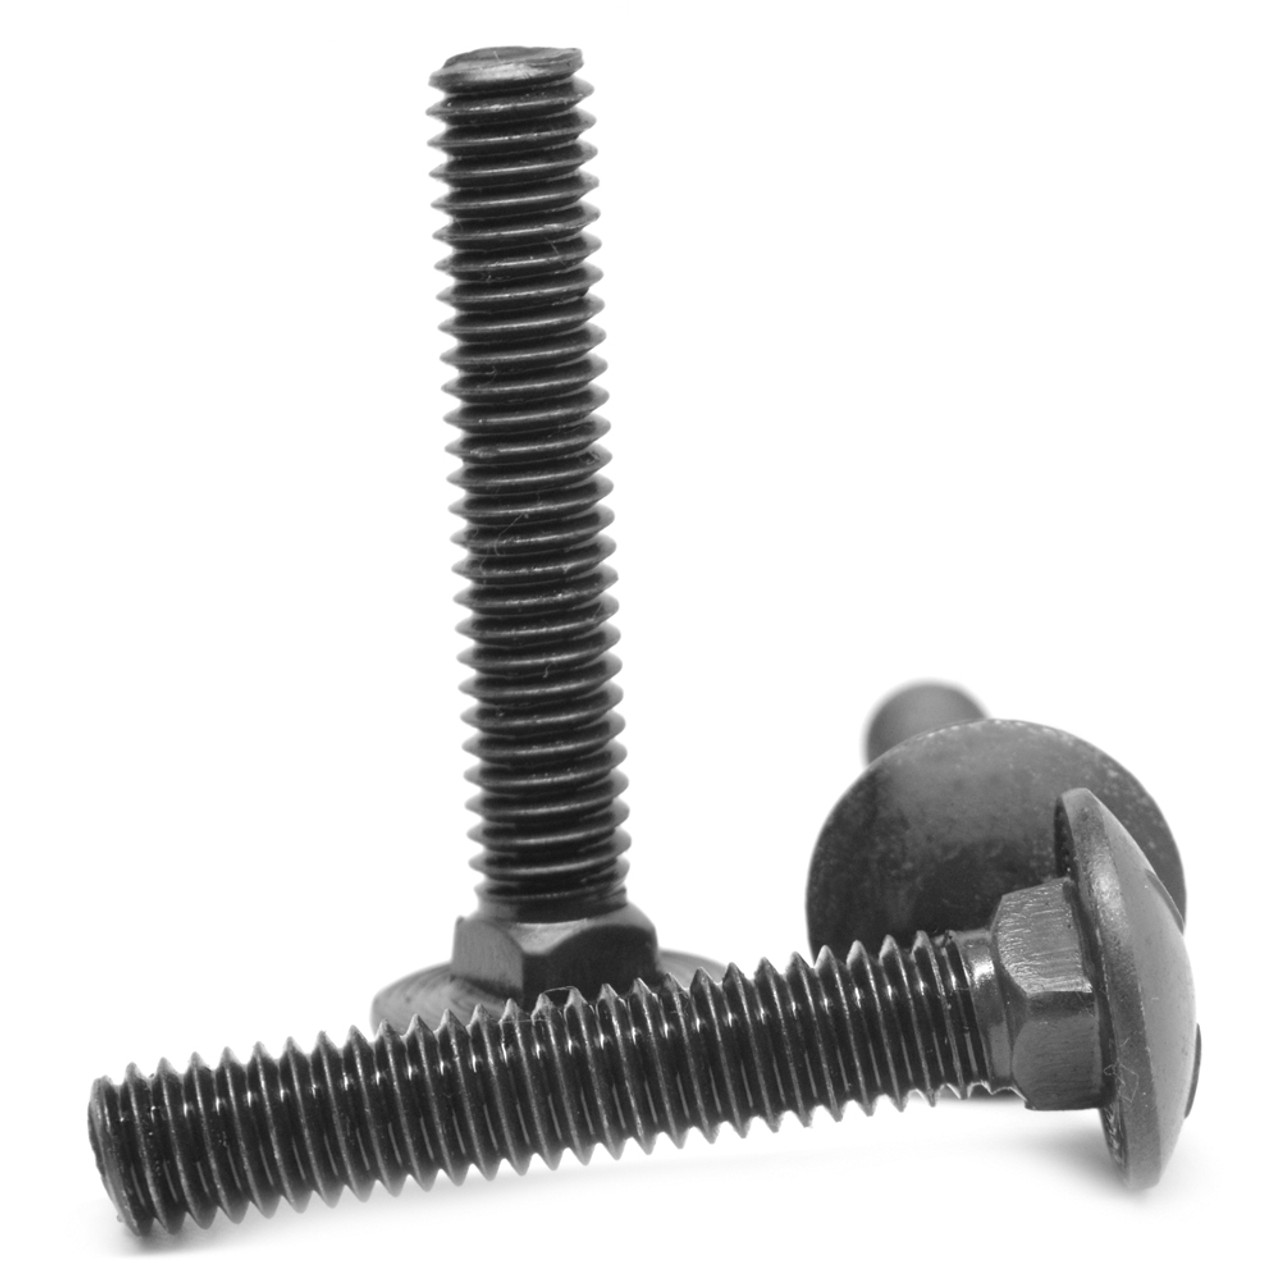 3/8-16 x 6 Coarse Thread Carriage Bolt Low Carbon Steel Black Oxide